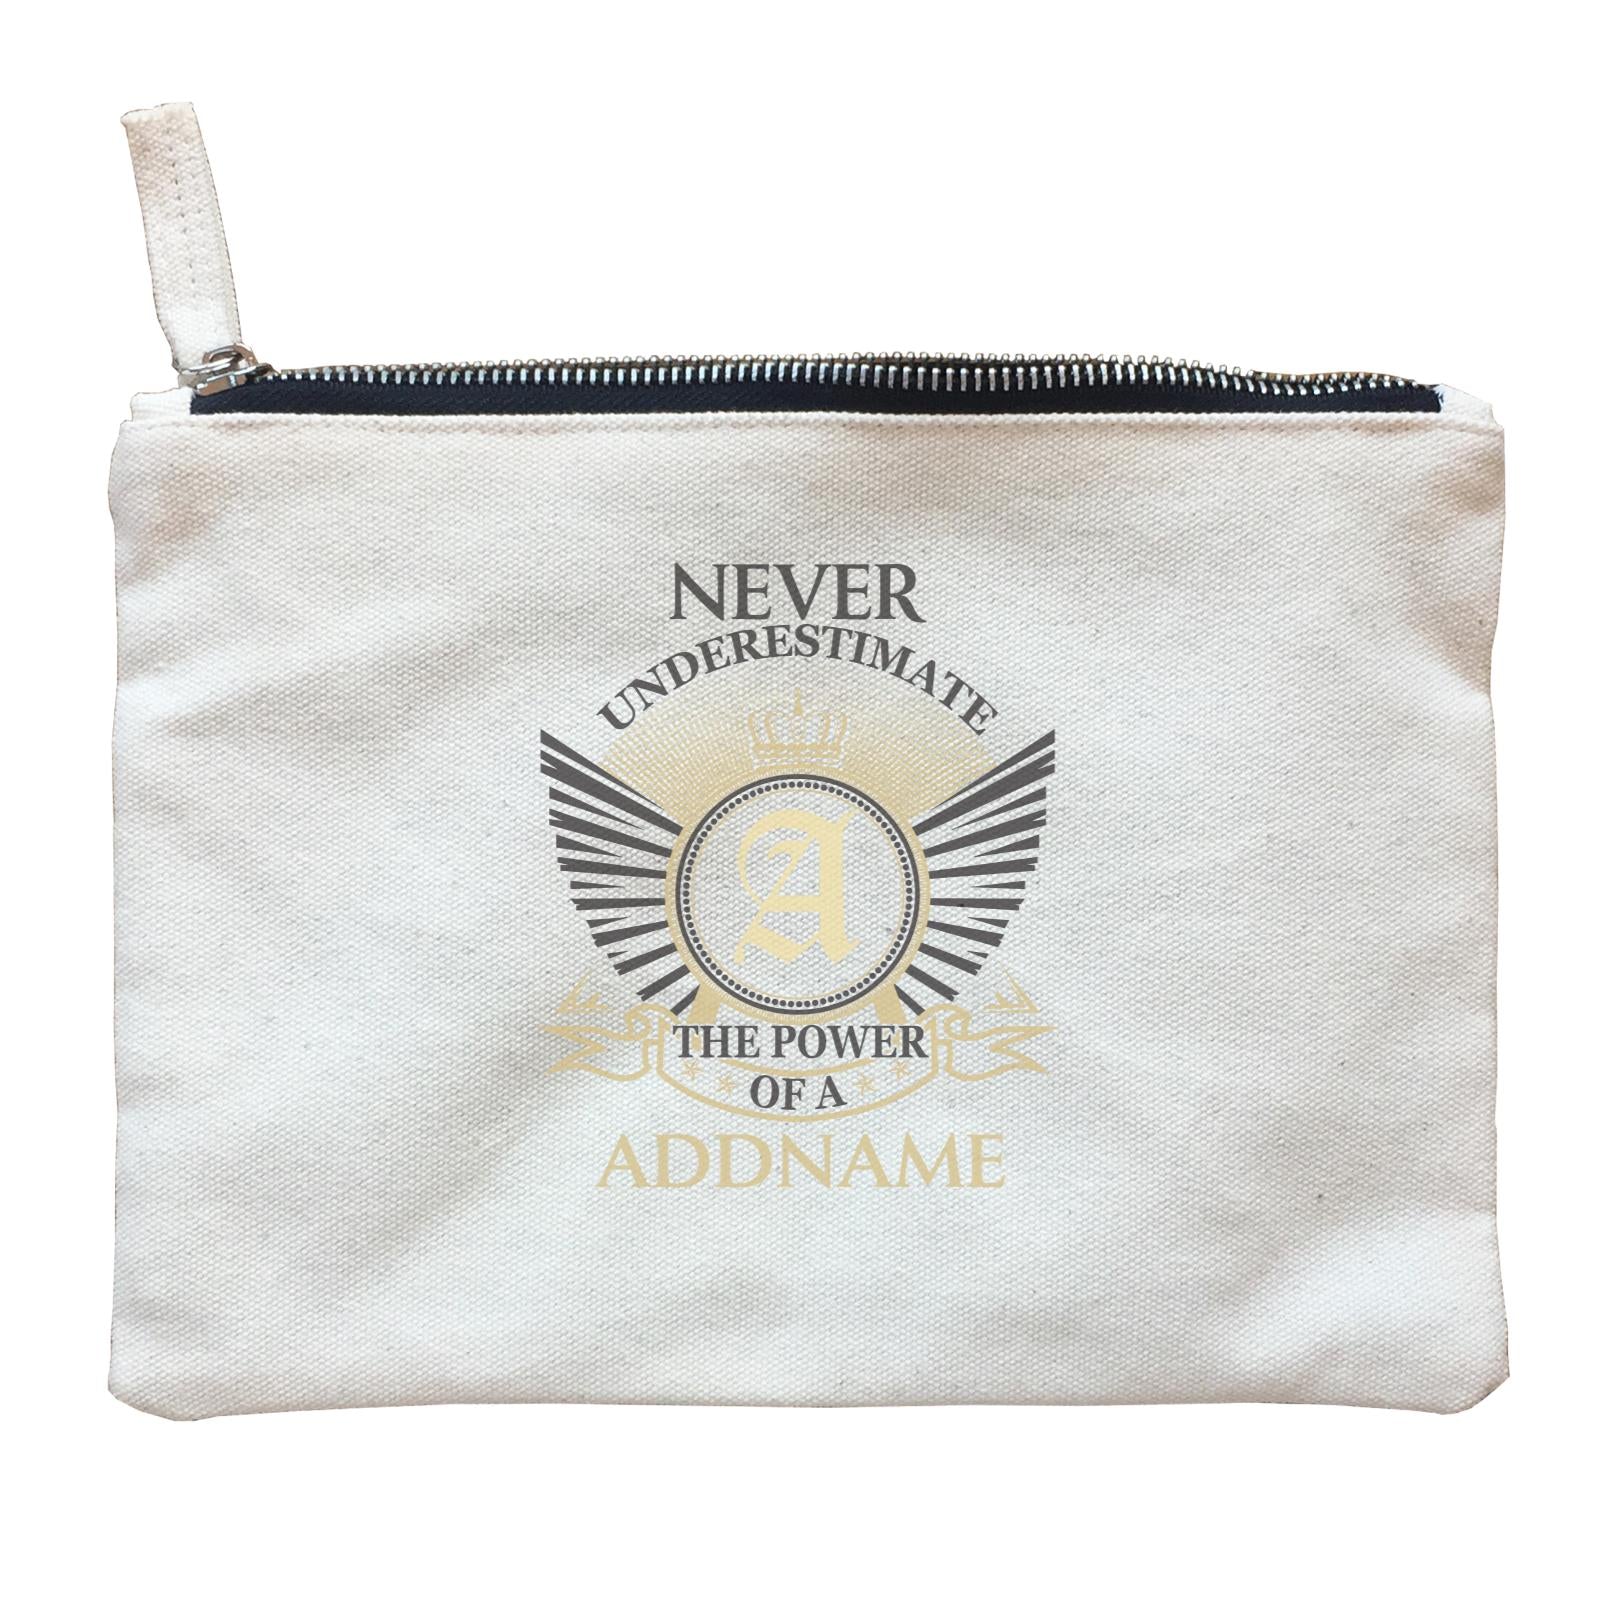 Personalize It Awesome Never Underestimate with  The Power of A with Add Initial and Addname Zipper Pouch